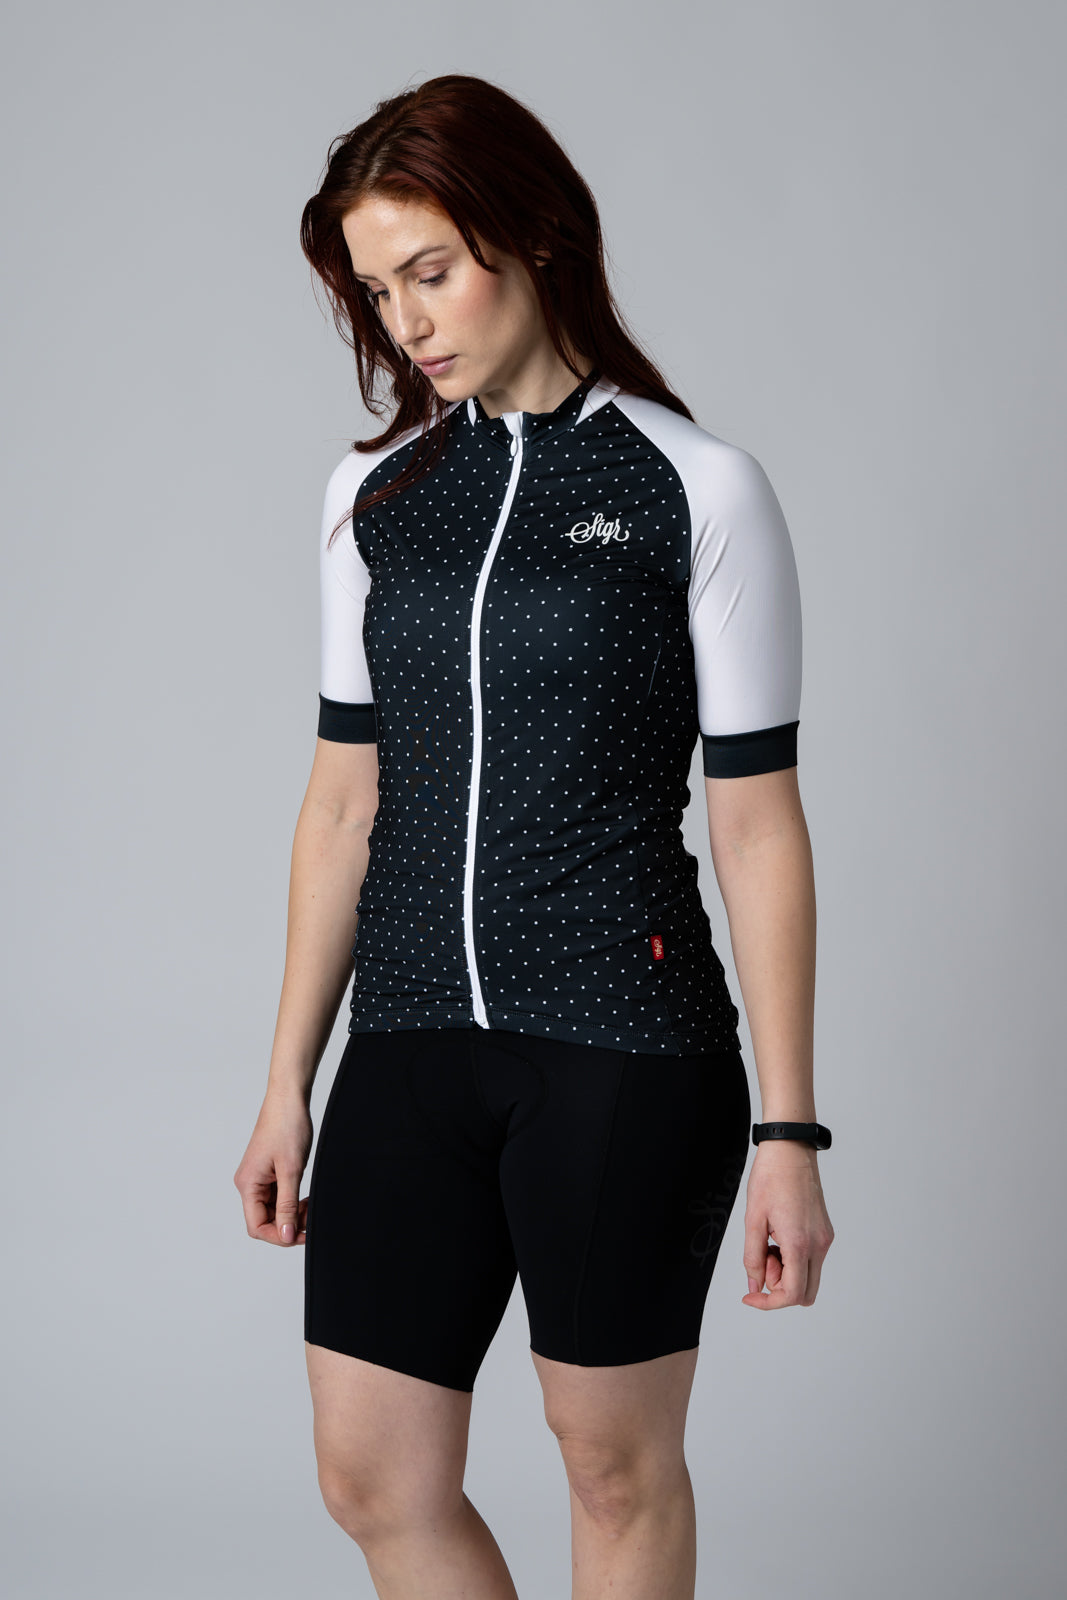 Black Legacy - Road Cycling Jersey for Women